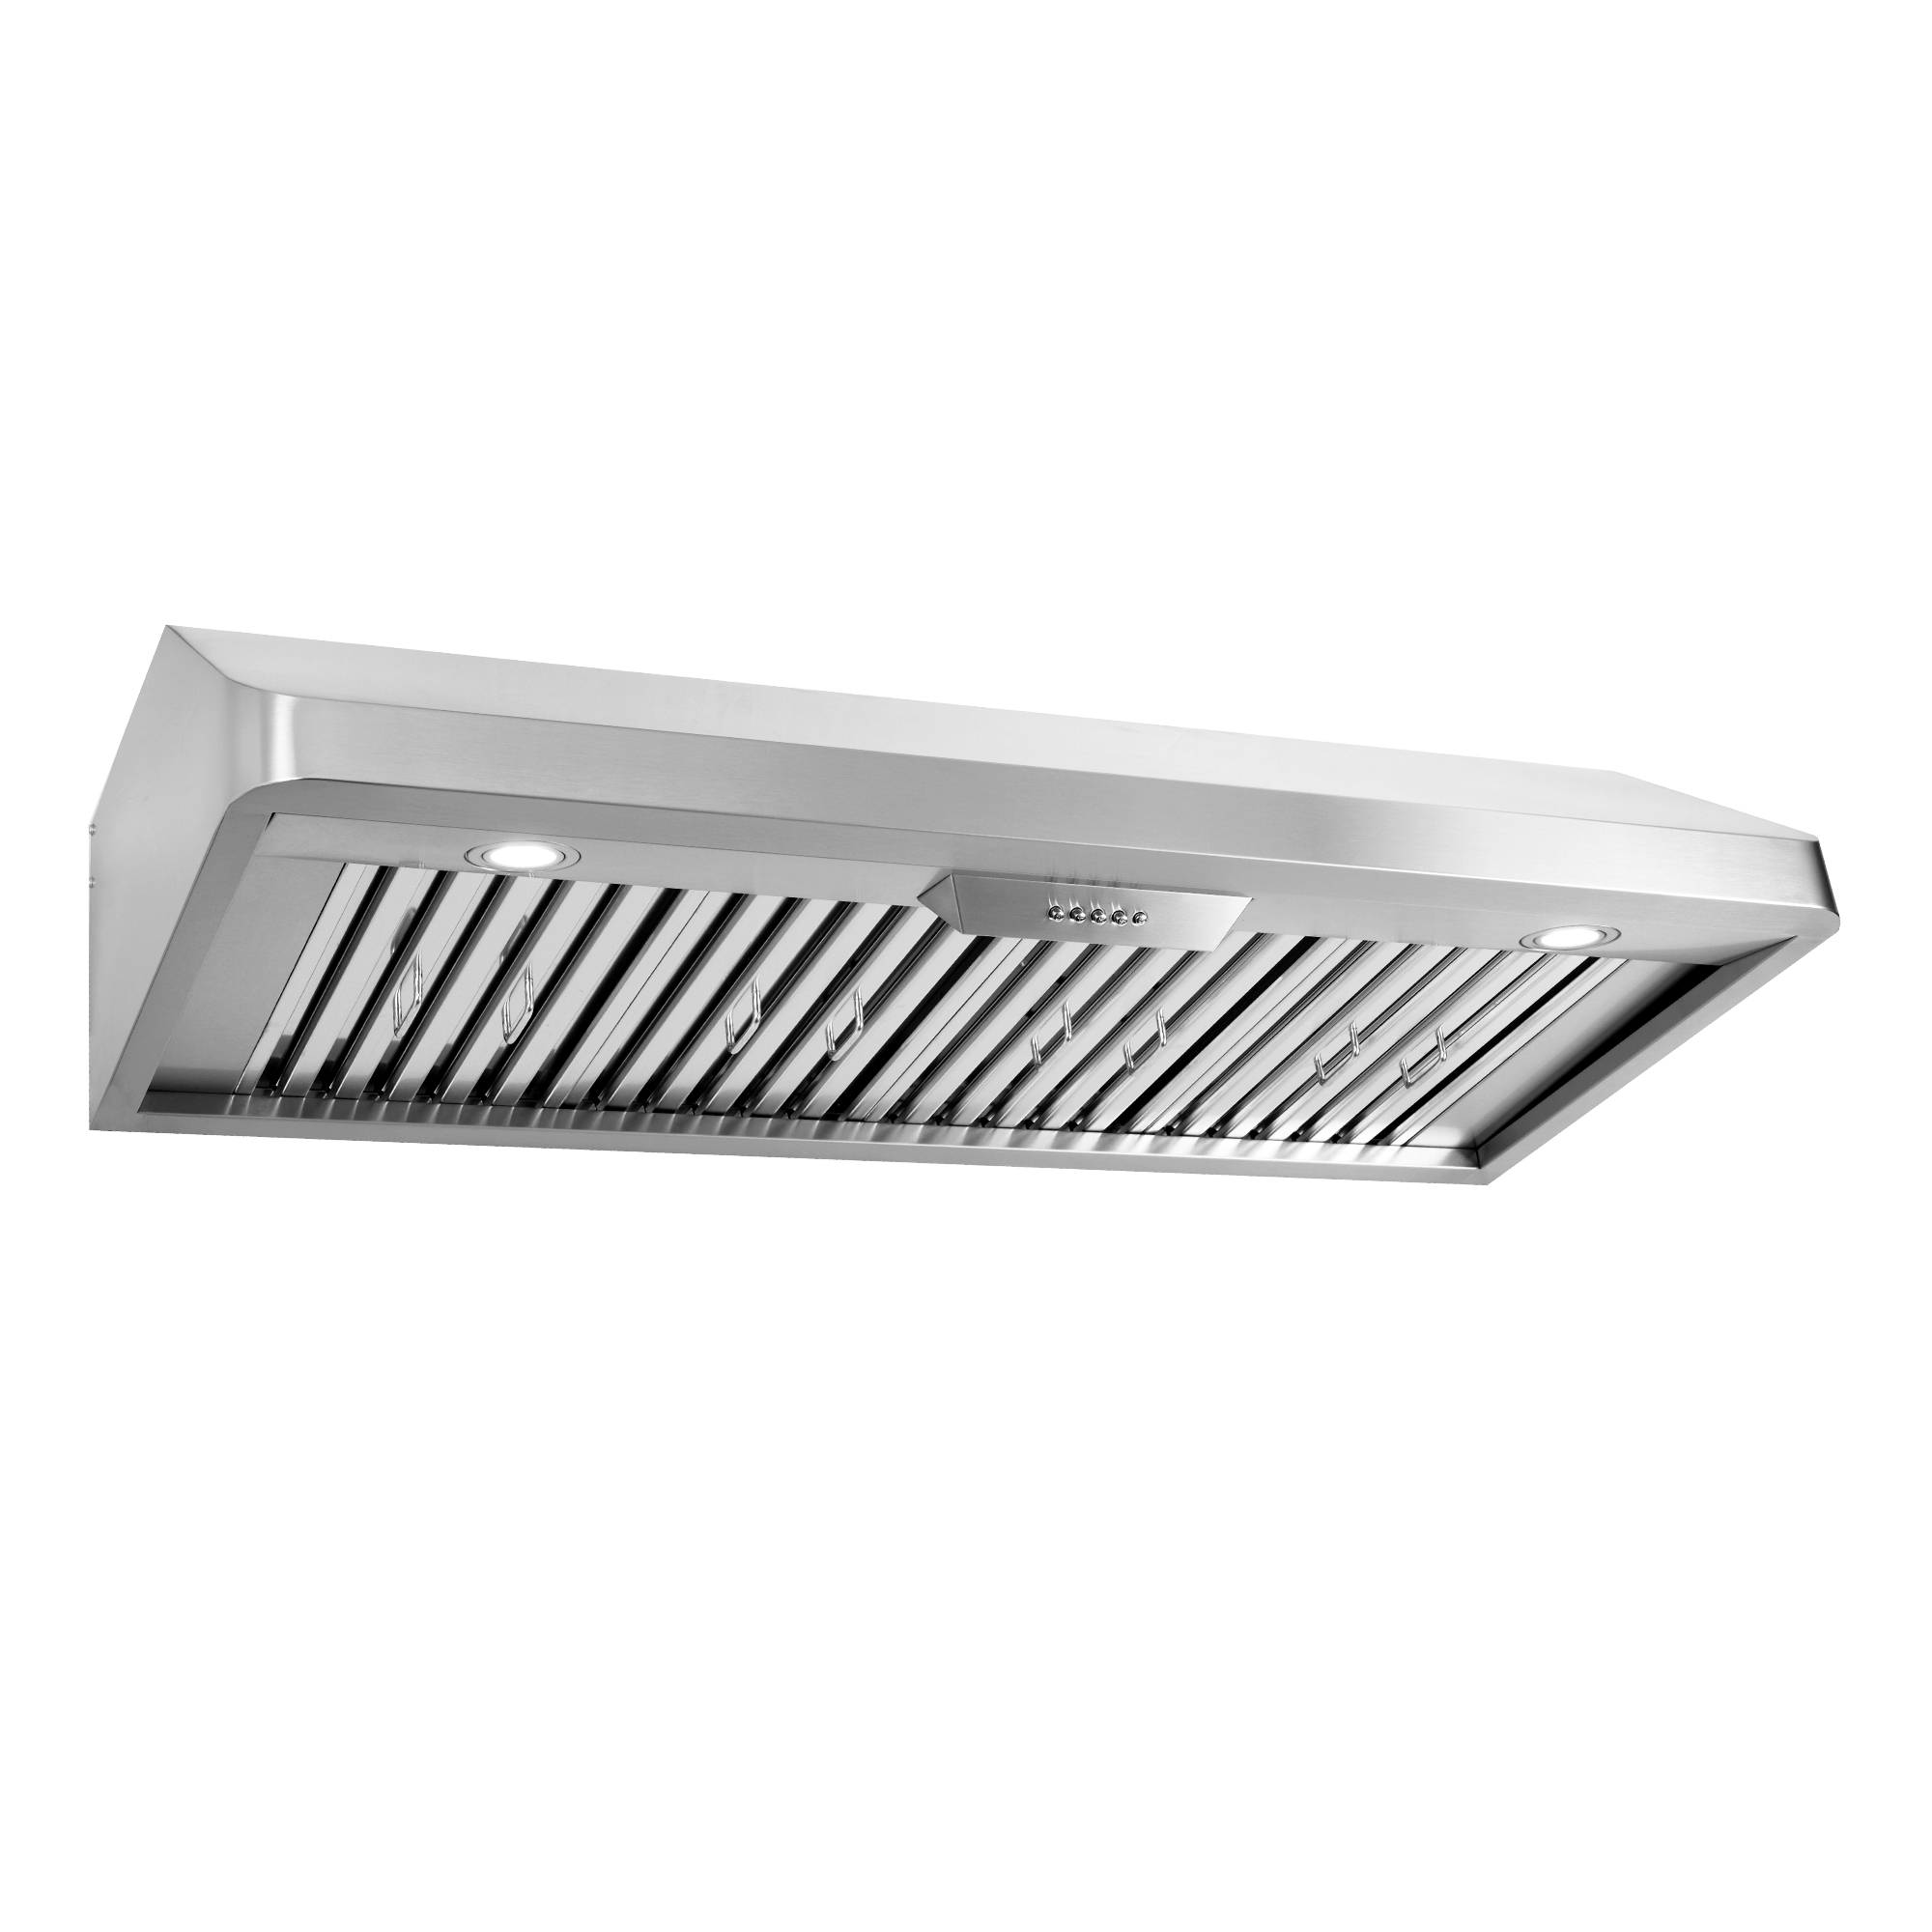 Cosmo 48 in. Convertible Under Cabinet Range Hood in Stainless Steel with Push Button Control, LED Light and Permanent Filters